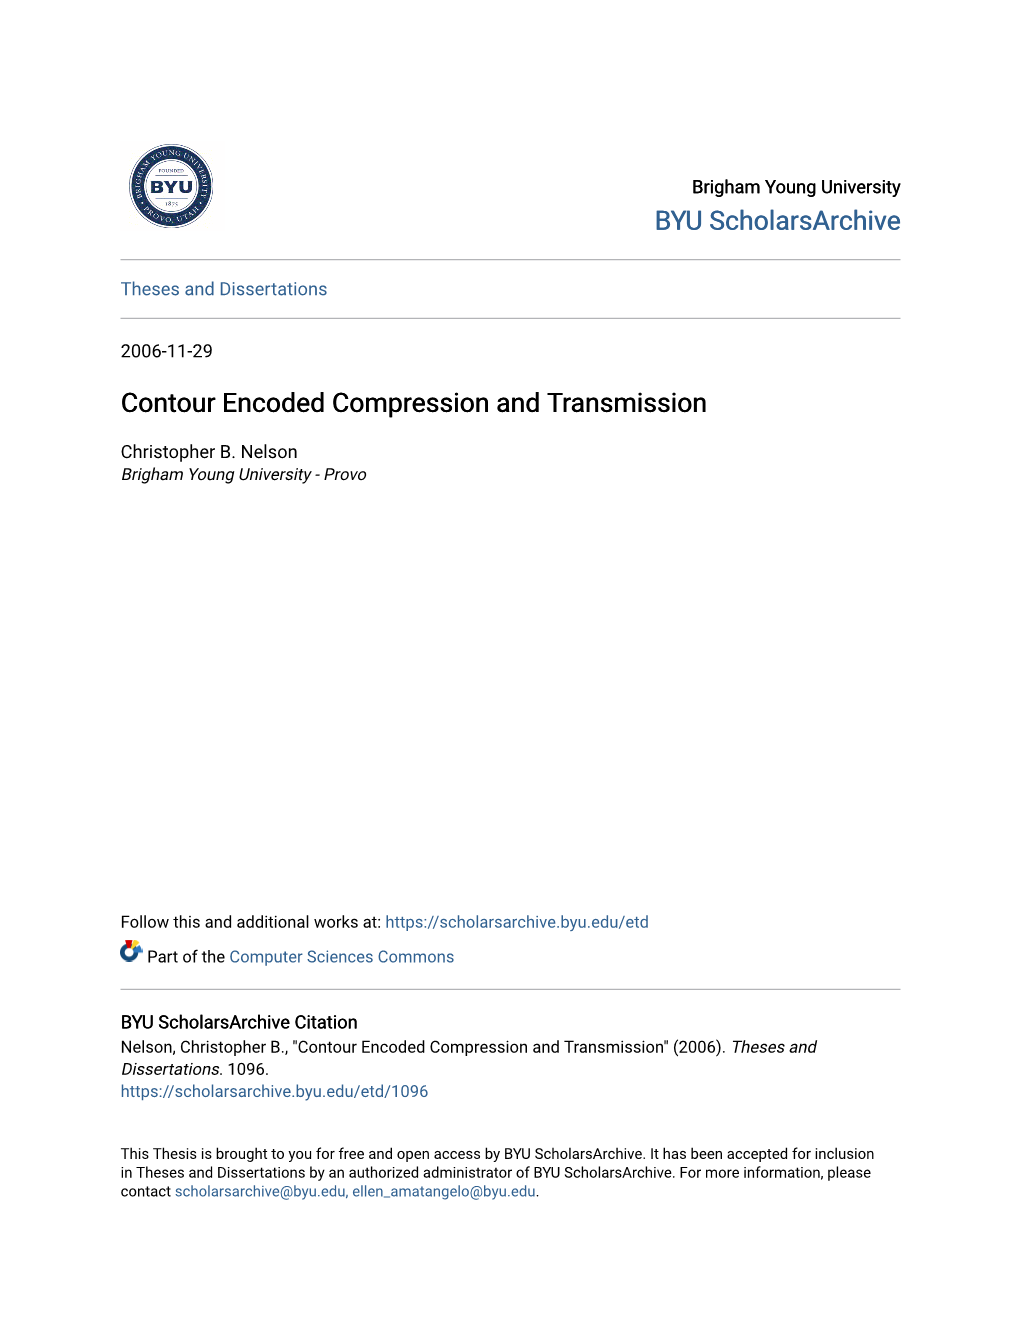 Contour Encoded Compression and Transmission